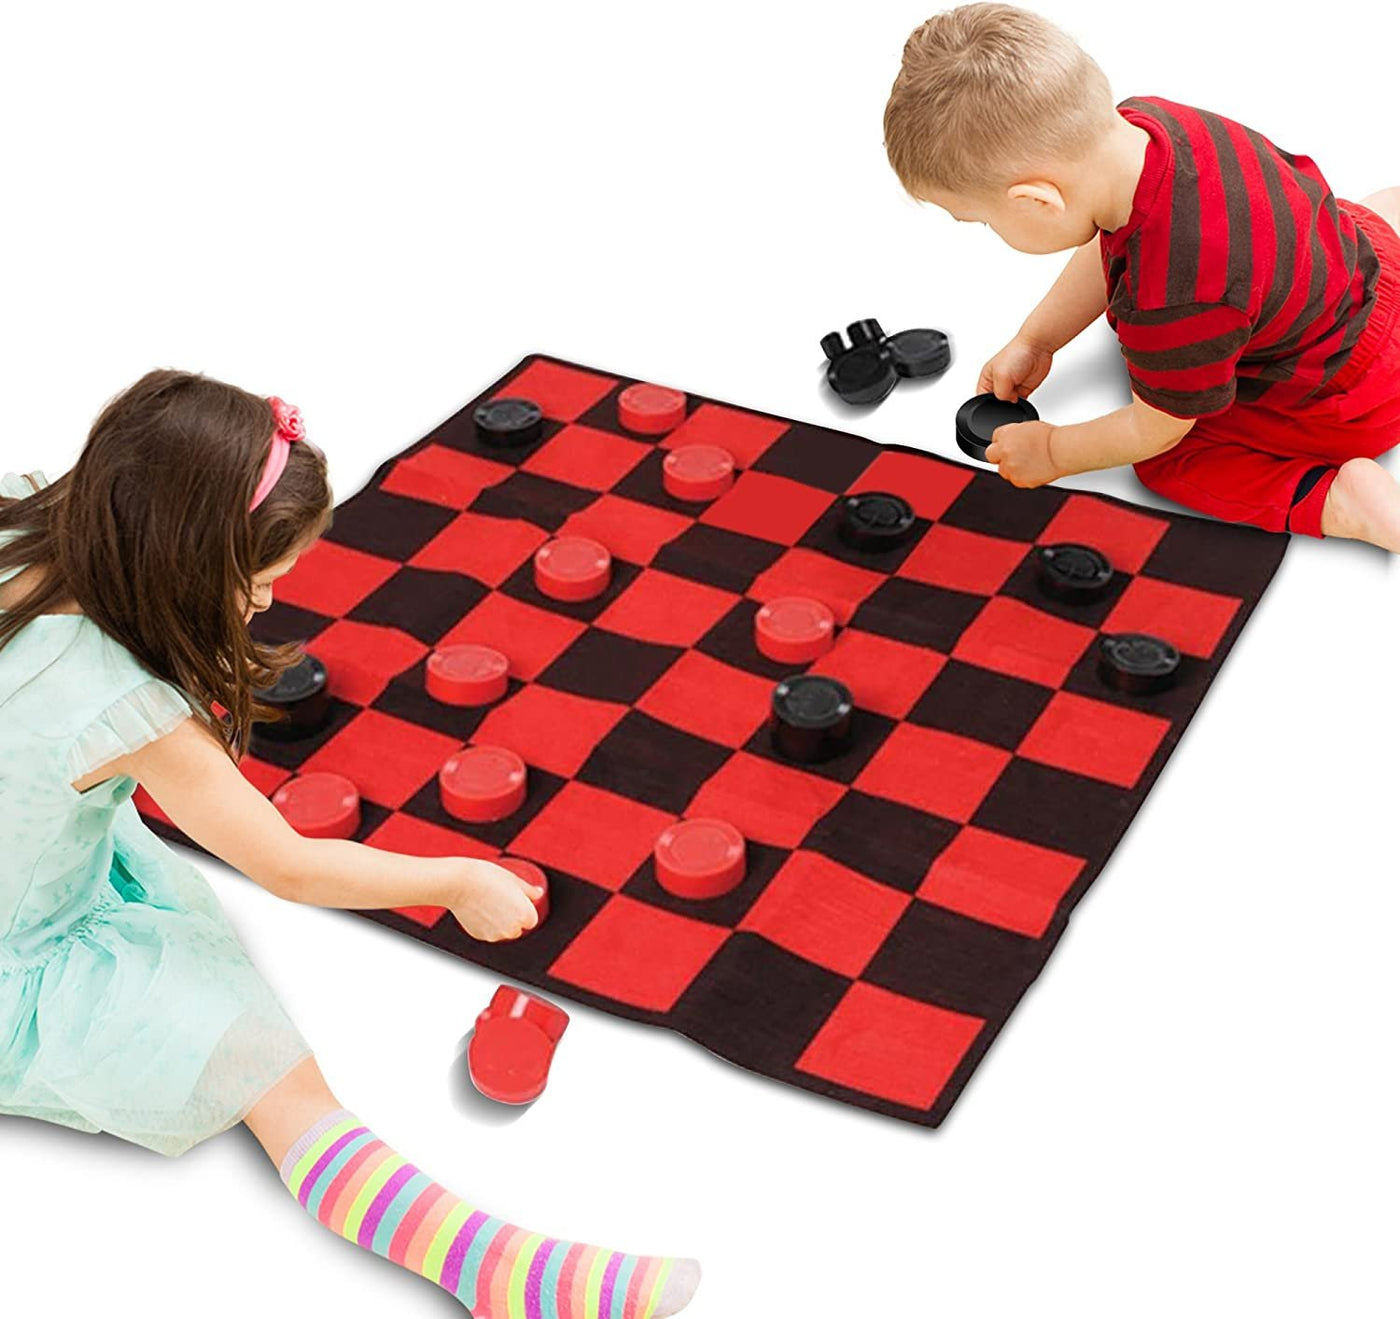 Giant Checkers Rug Set by Gamie - 34.5 x 34.5" Jumbo Checker Board Floor Mat Game with Huge Pieces - Great Gift Idea for Boys and Girls, Fun Birthday Party Activity - Play Room Rug - Red and Black